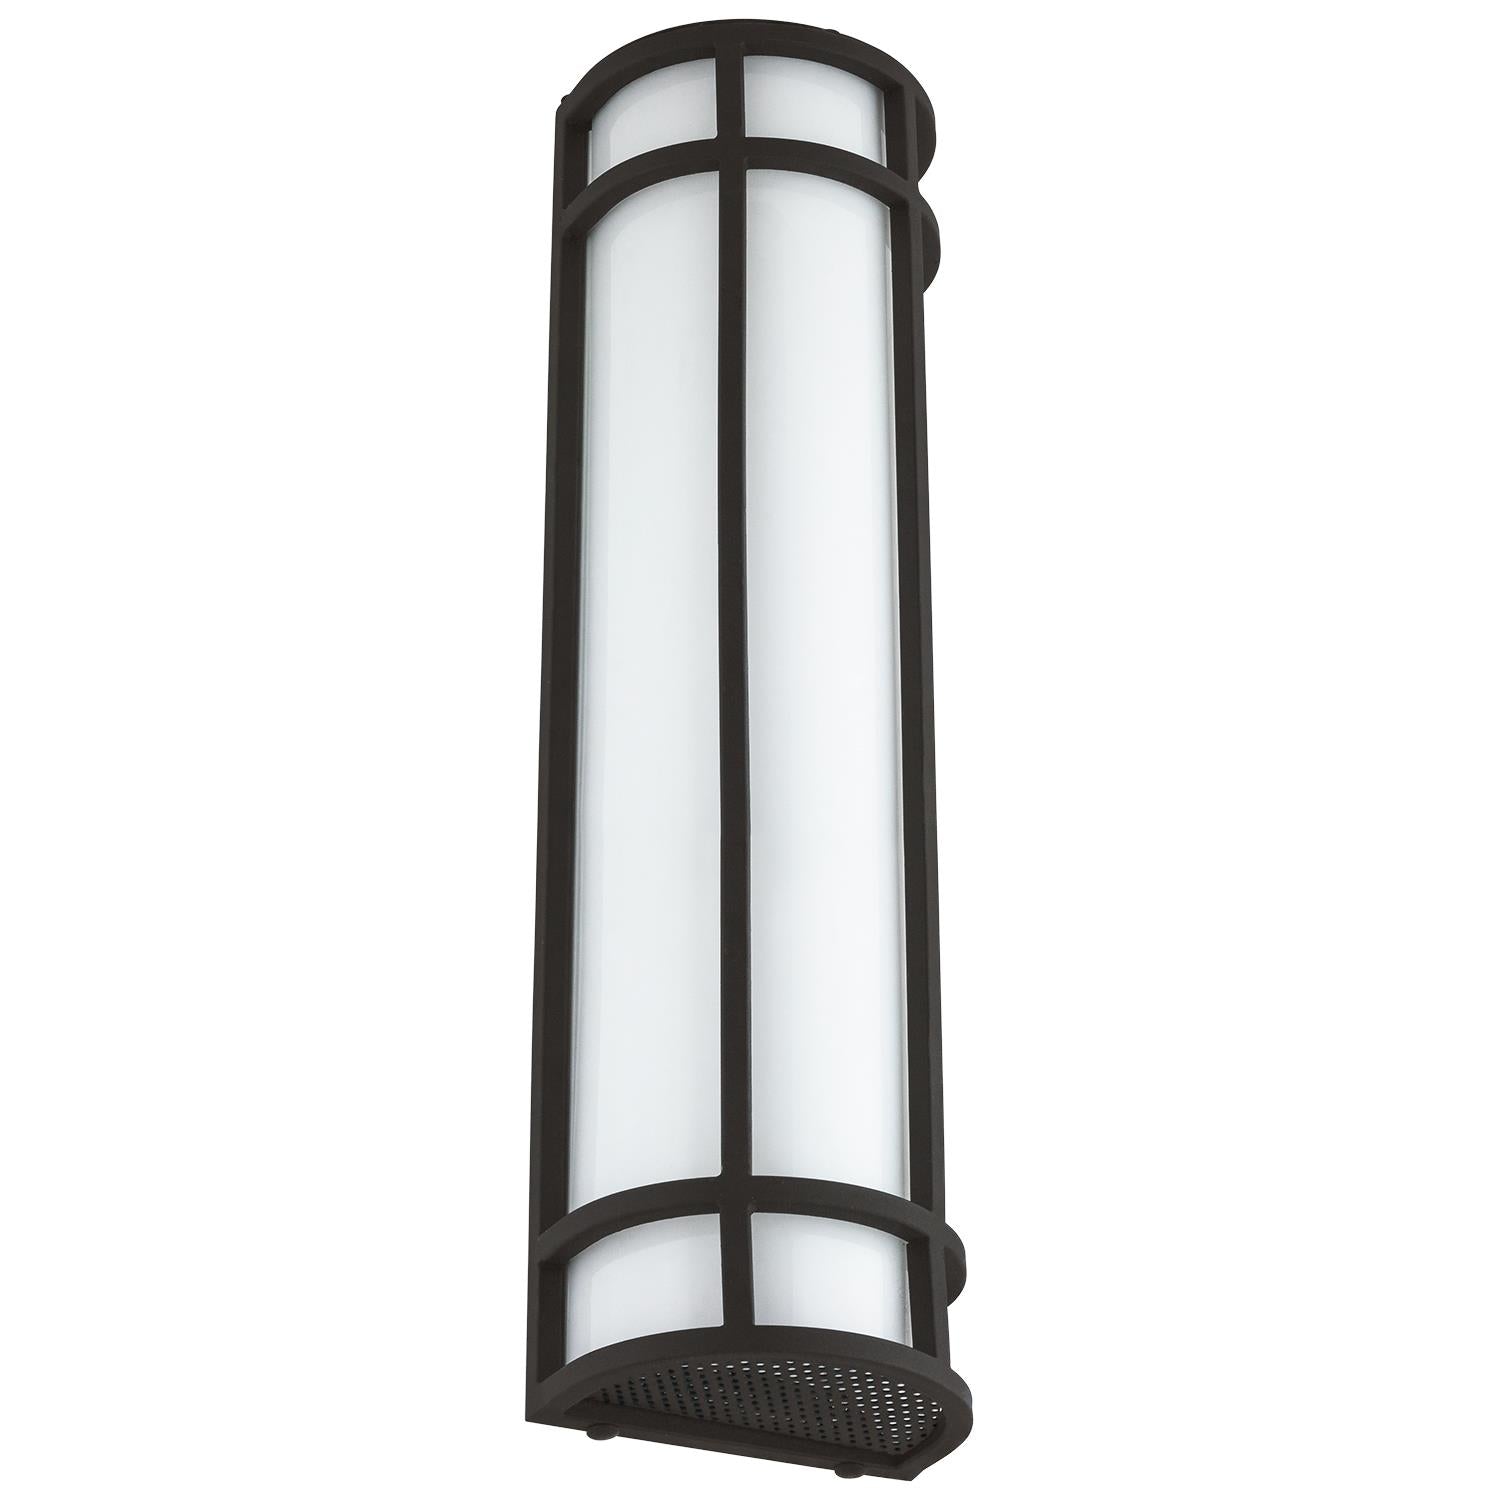 30" Mission Style Wall Sconce - 28W - 1500 Lm - 4000K - Cool White - Outdoor - Bronze Finish